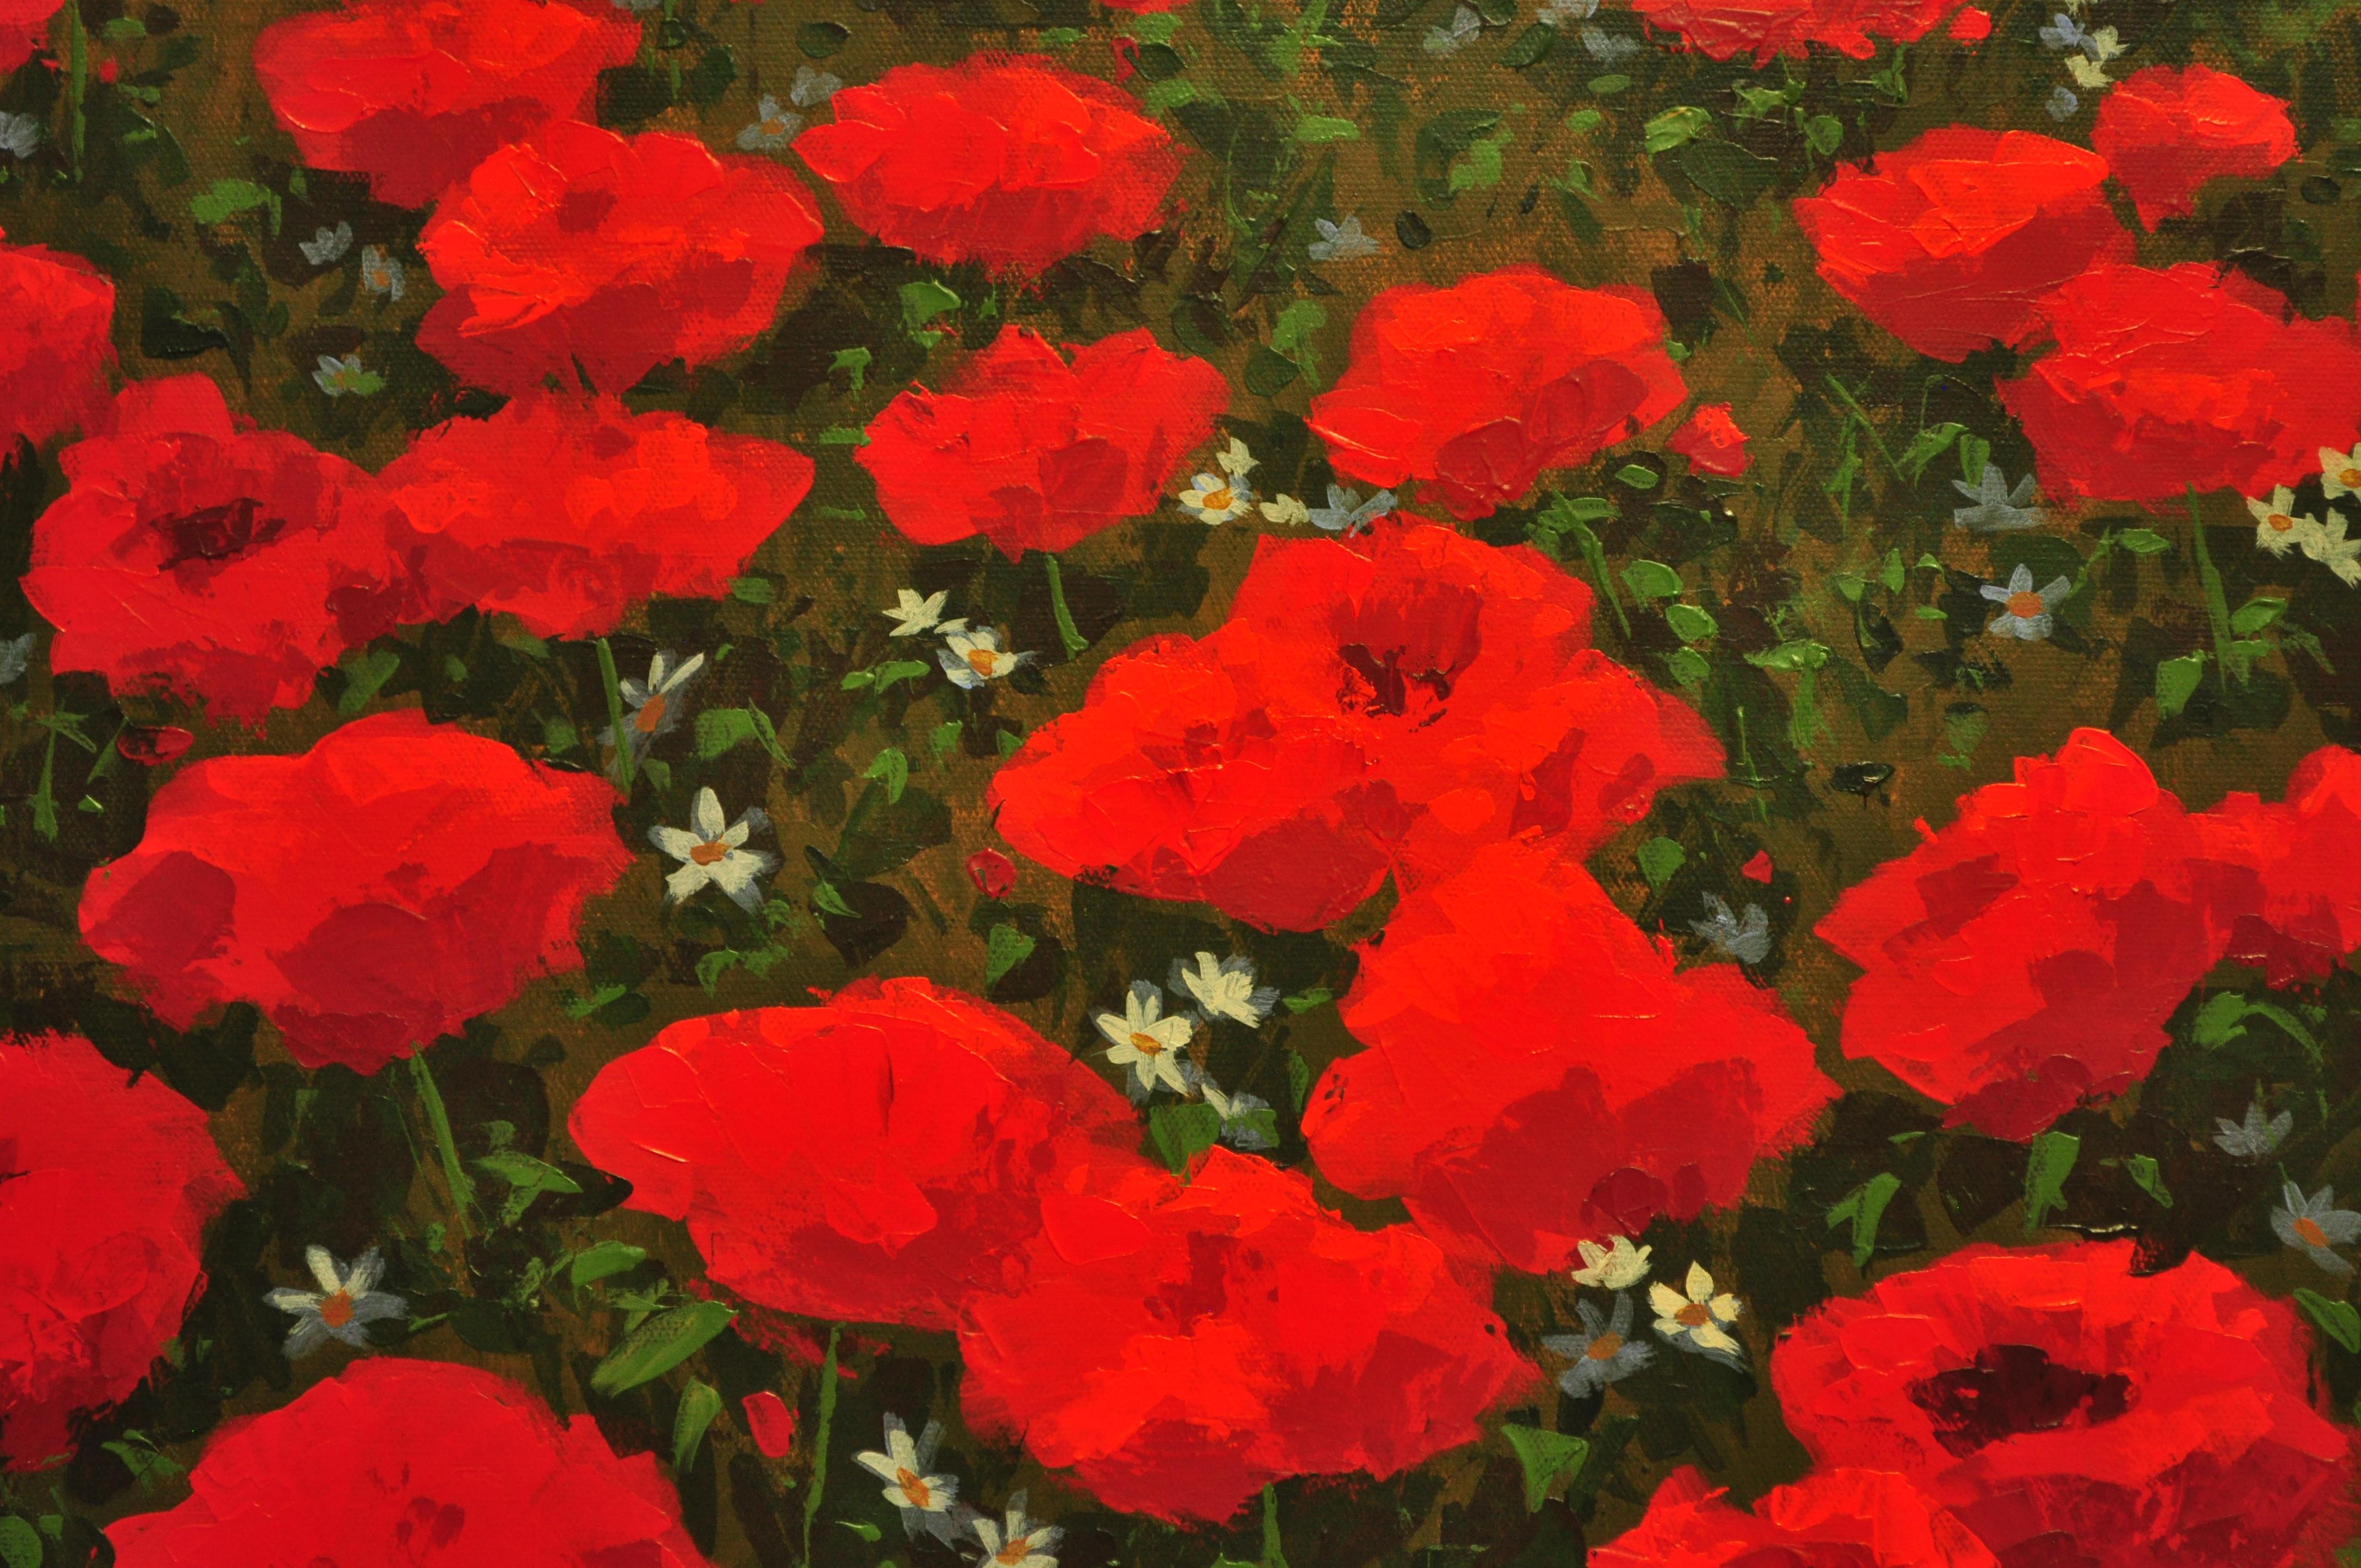 <p>Artist Comments<br />Red poppies are the most brilliant flowers that I can think of. They are wonderful to paint. I can imagine myself walking through this field and enjoying the late afternoon.</p><br /><p>About the Artist<br />After painting